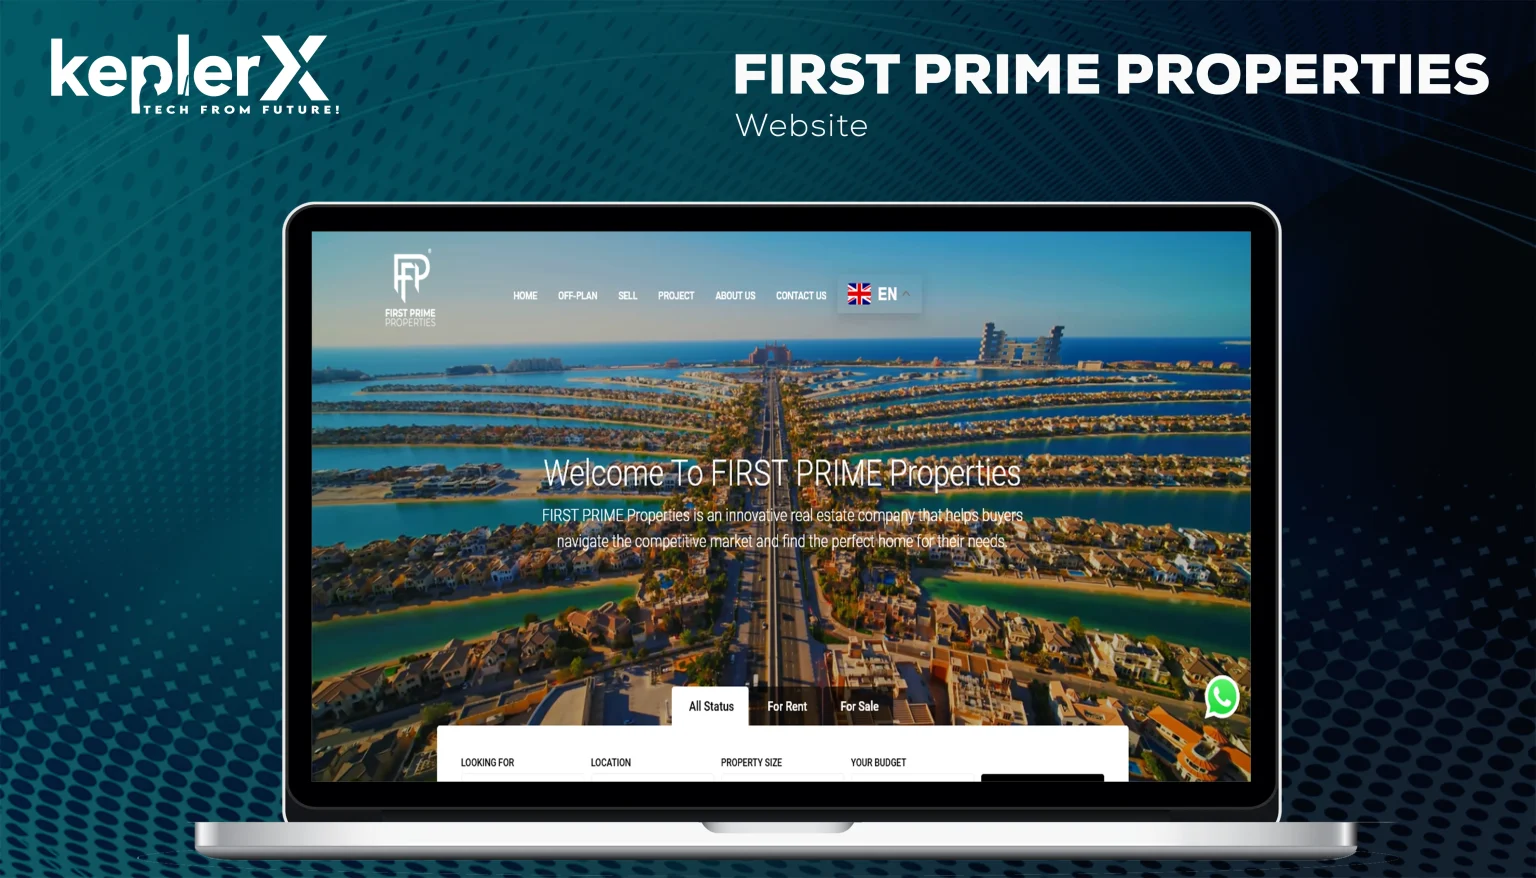 FIRST PRIME PROPERTIES